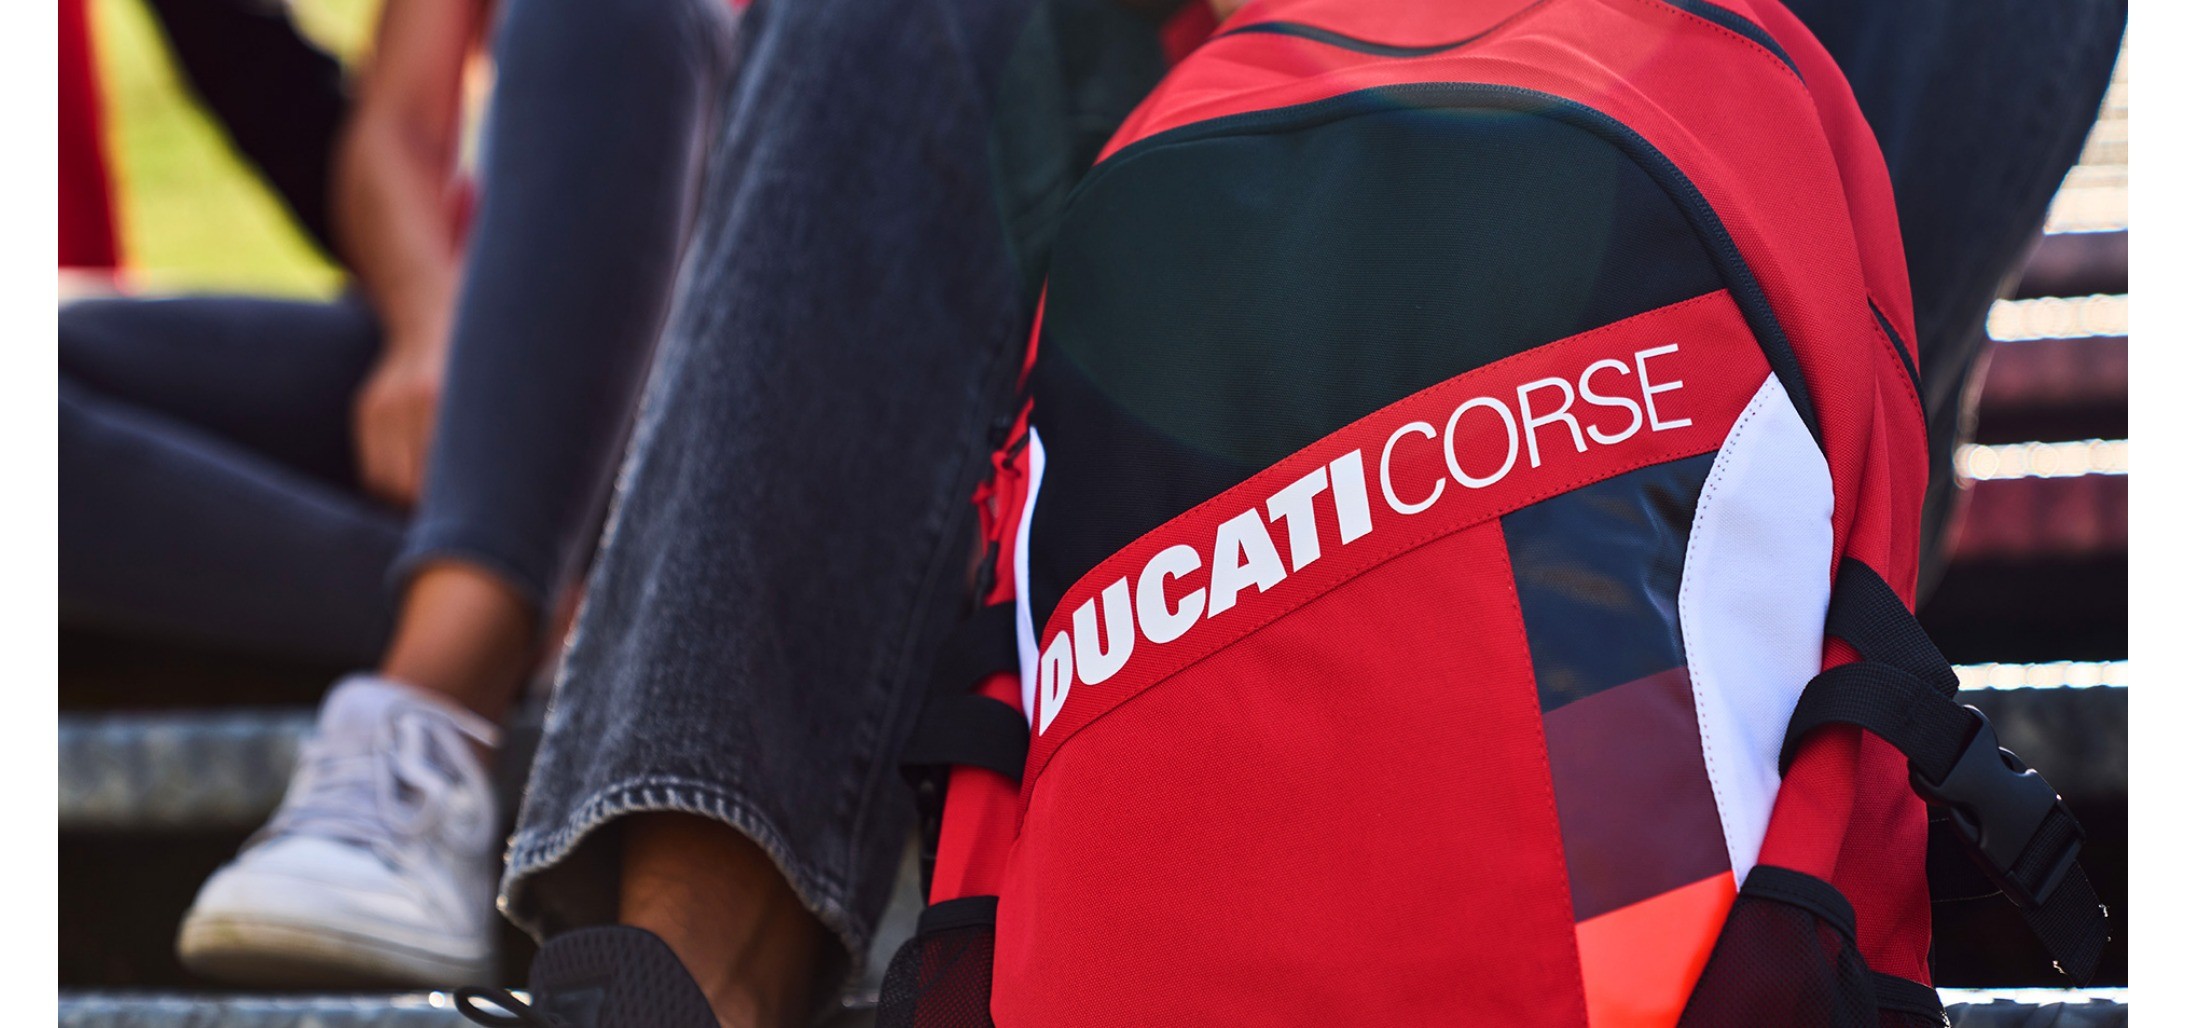 Ducati-branded style: the 2023 collection arrives in stores